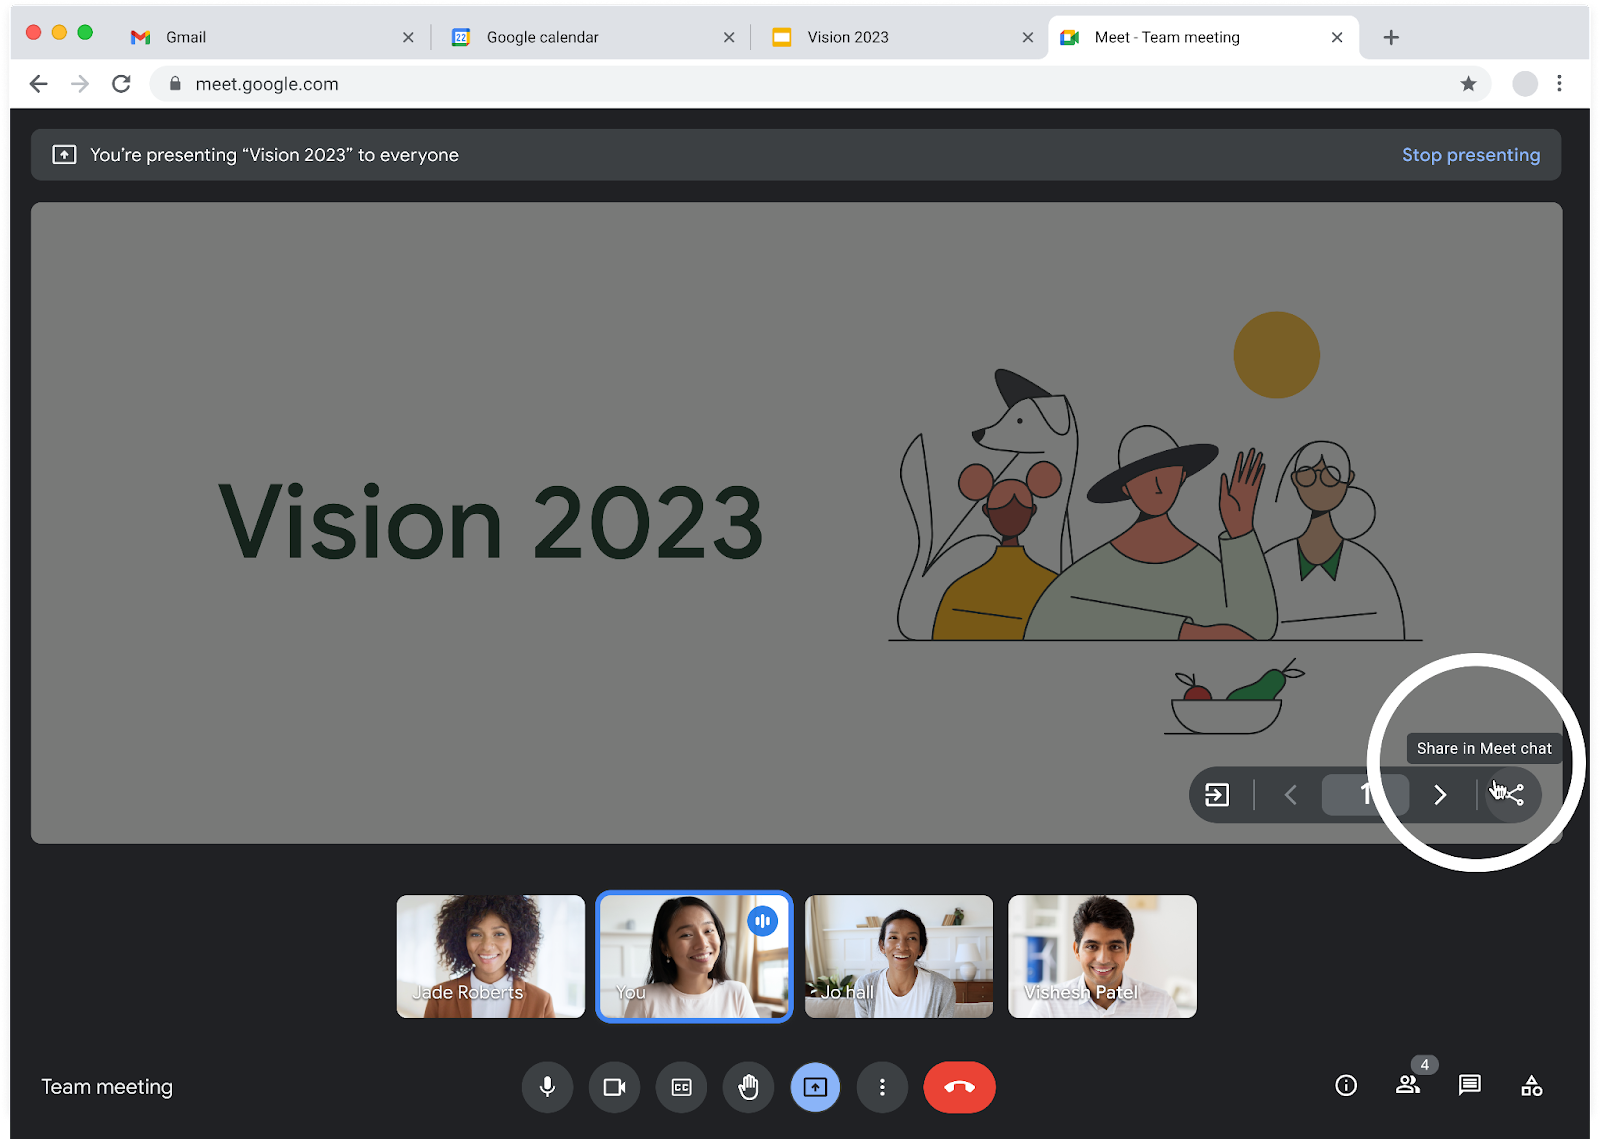 Google Meet session with white circle around new "Share in Meet chat" button